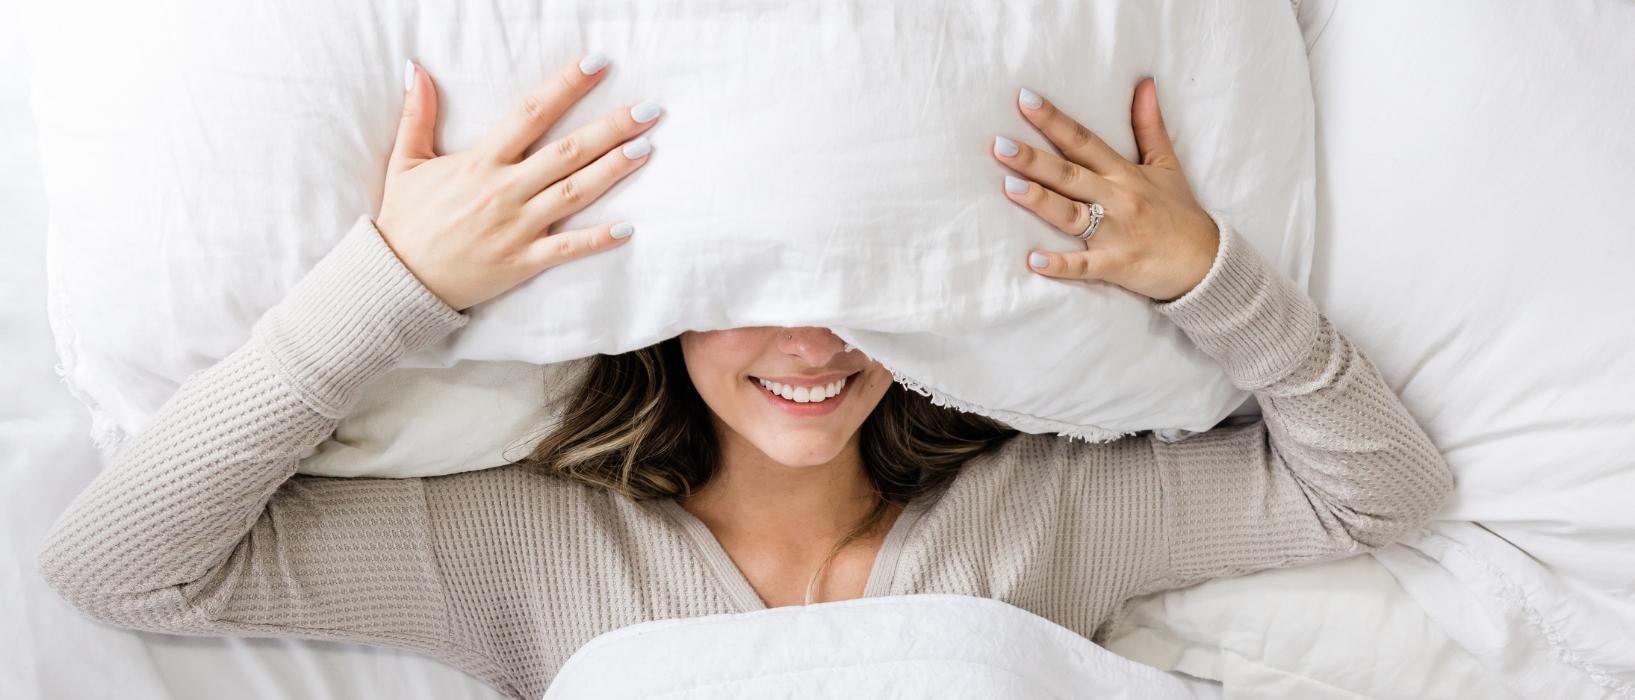 woman lying in bed with white sheets with pillow over her face so you can only see her arms and month smiling